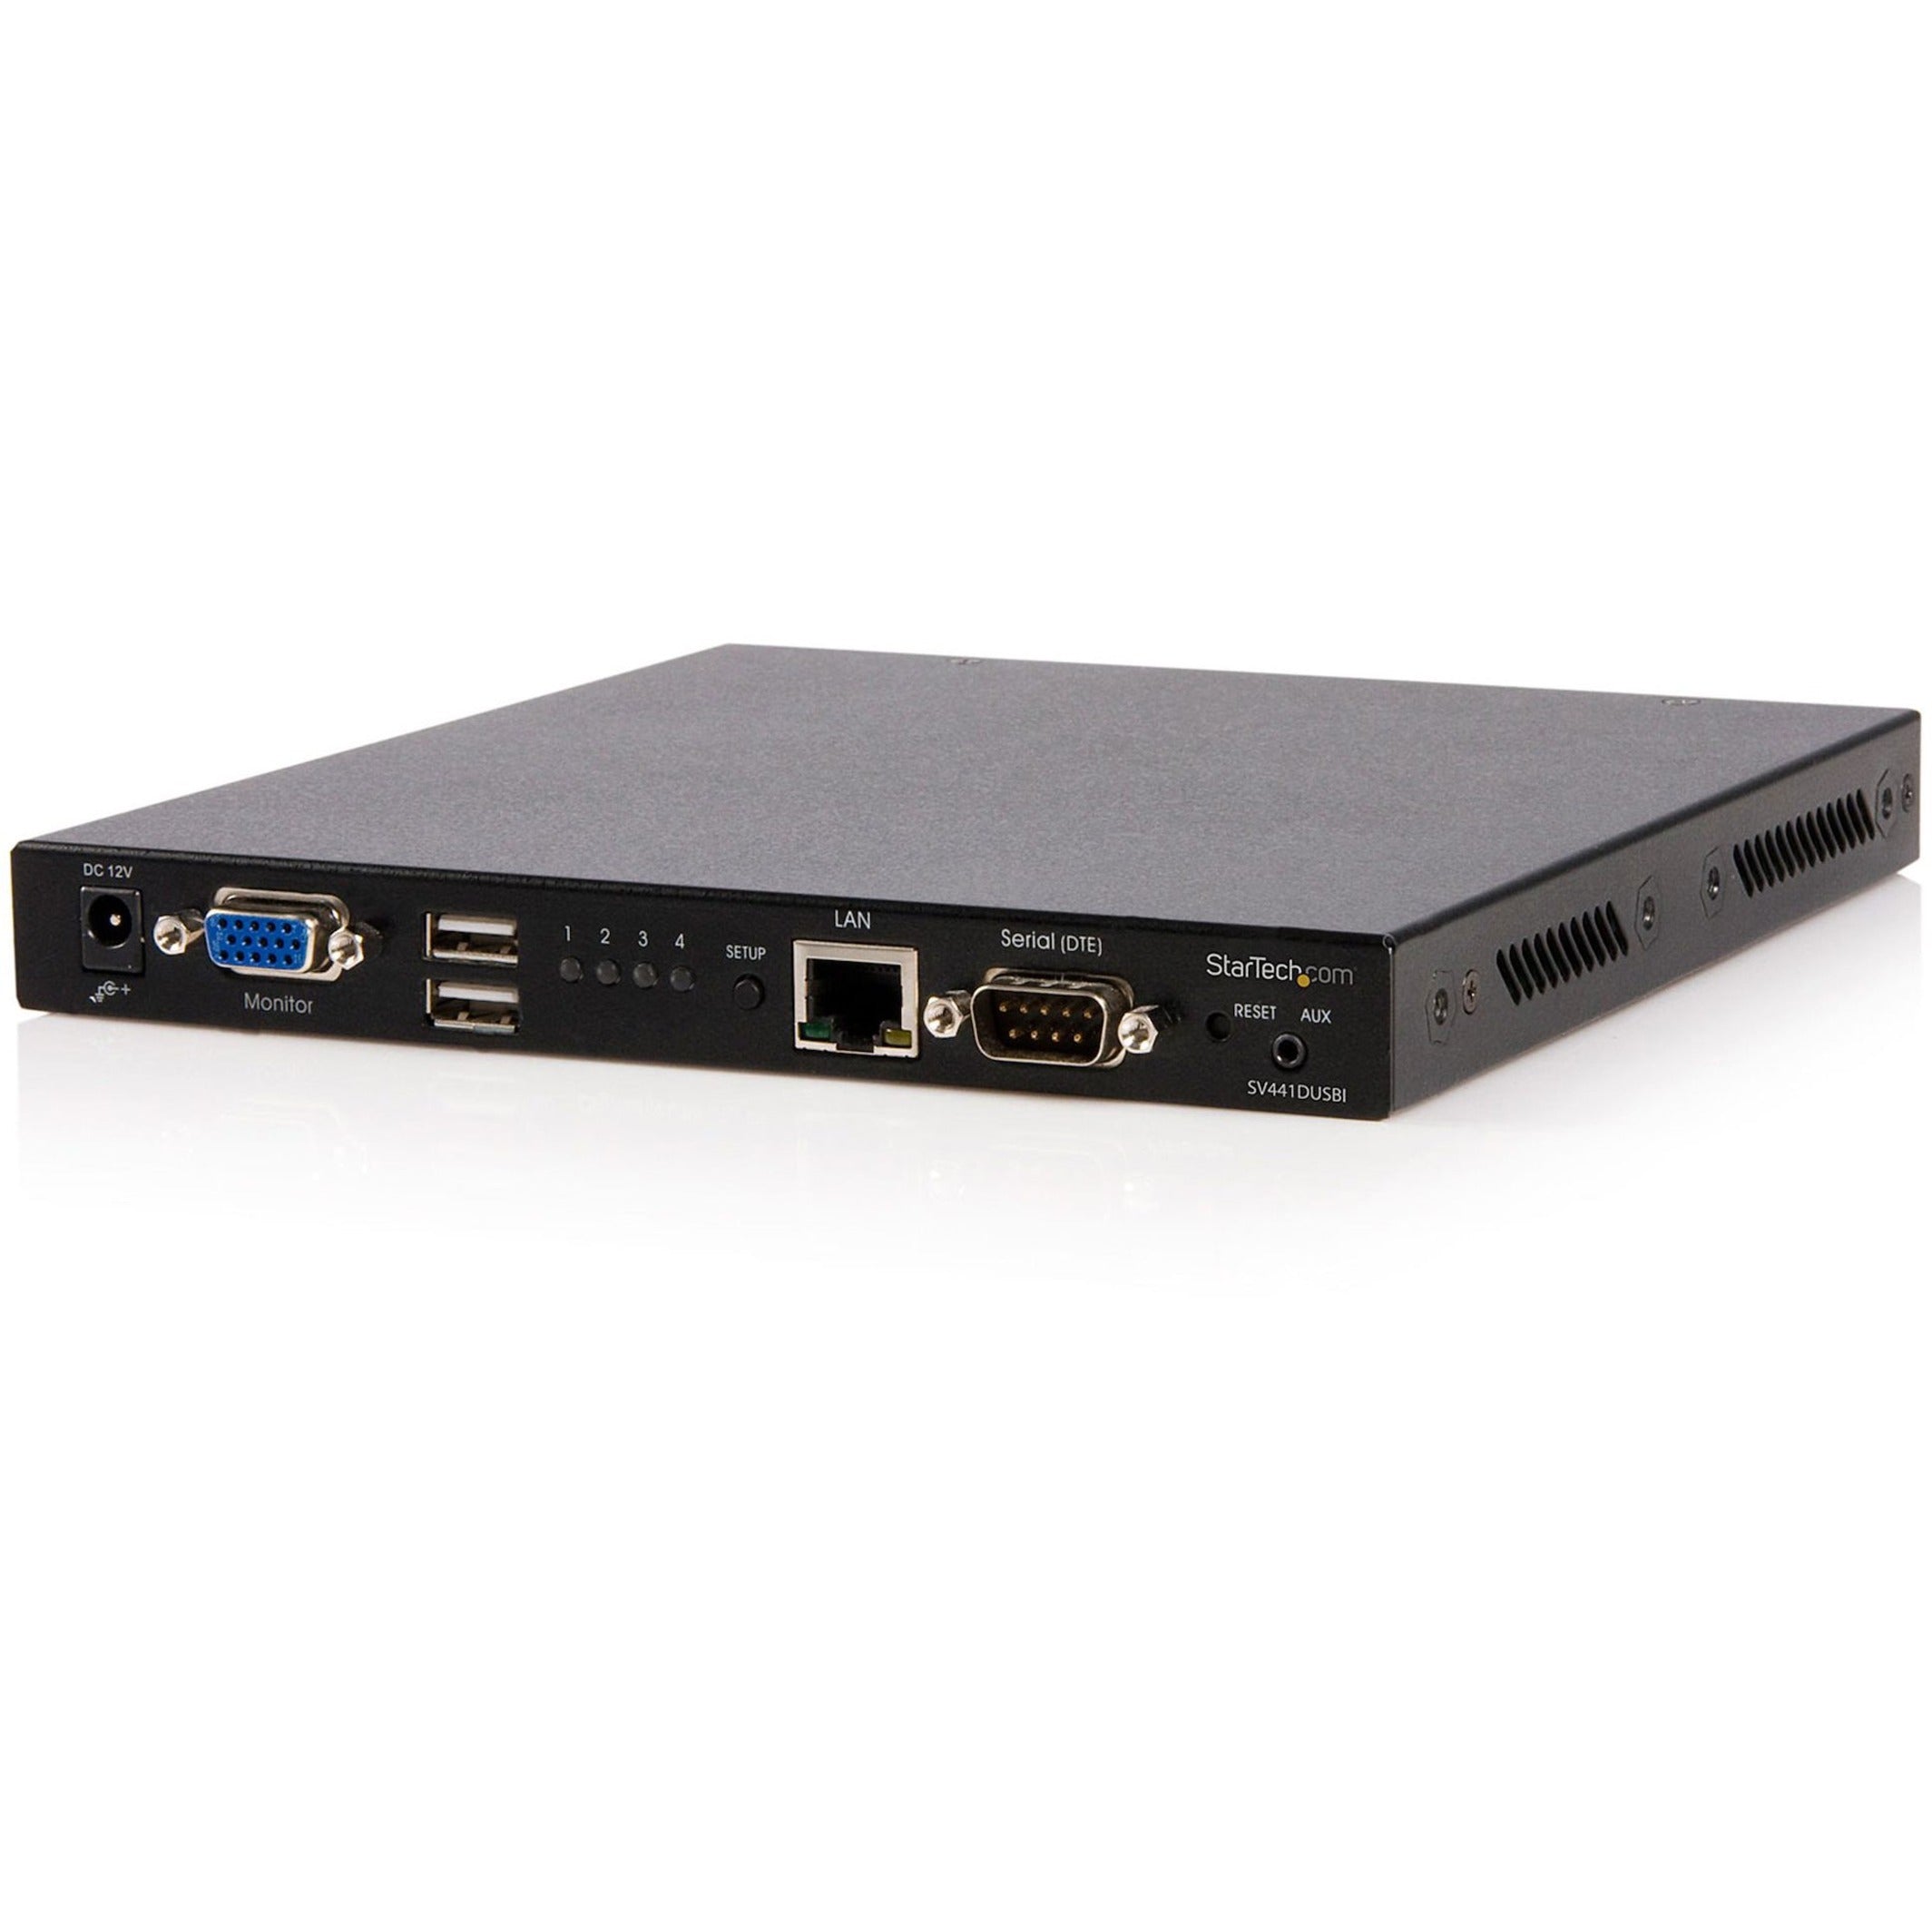 StarTech.com SV441DUSBI 4-Port USB VGA IP KVM Switch with Virtual Media, Securely Manage up to 4 Computers